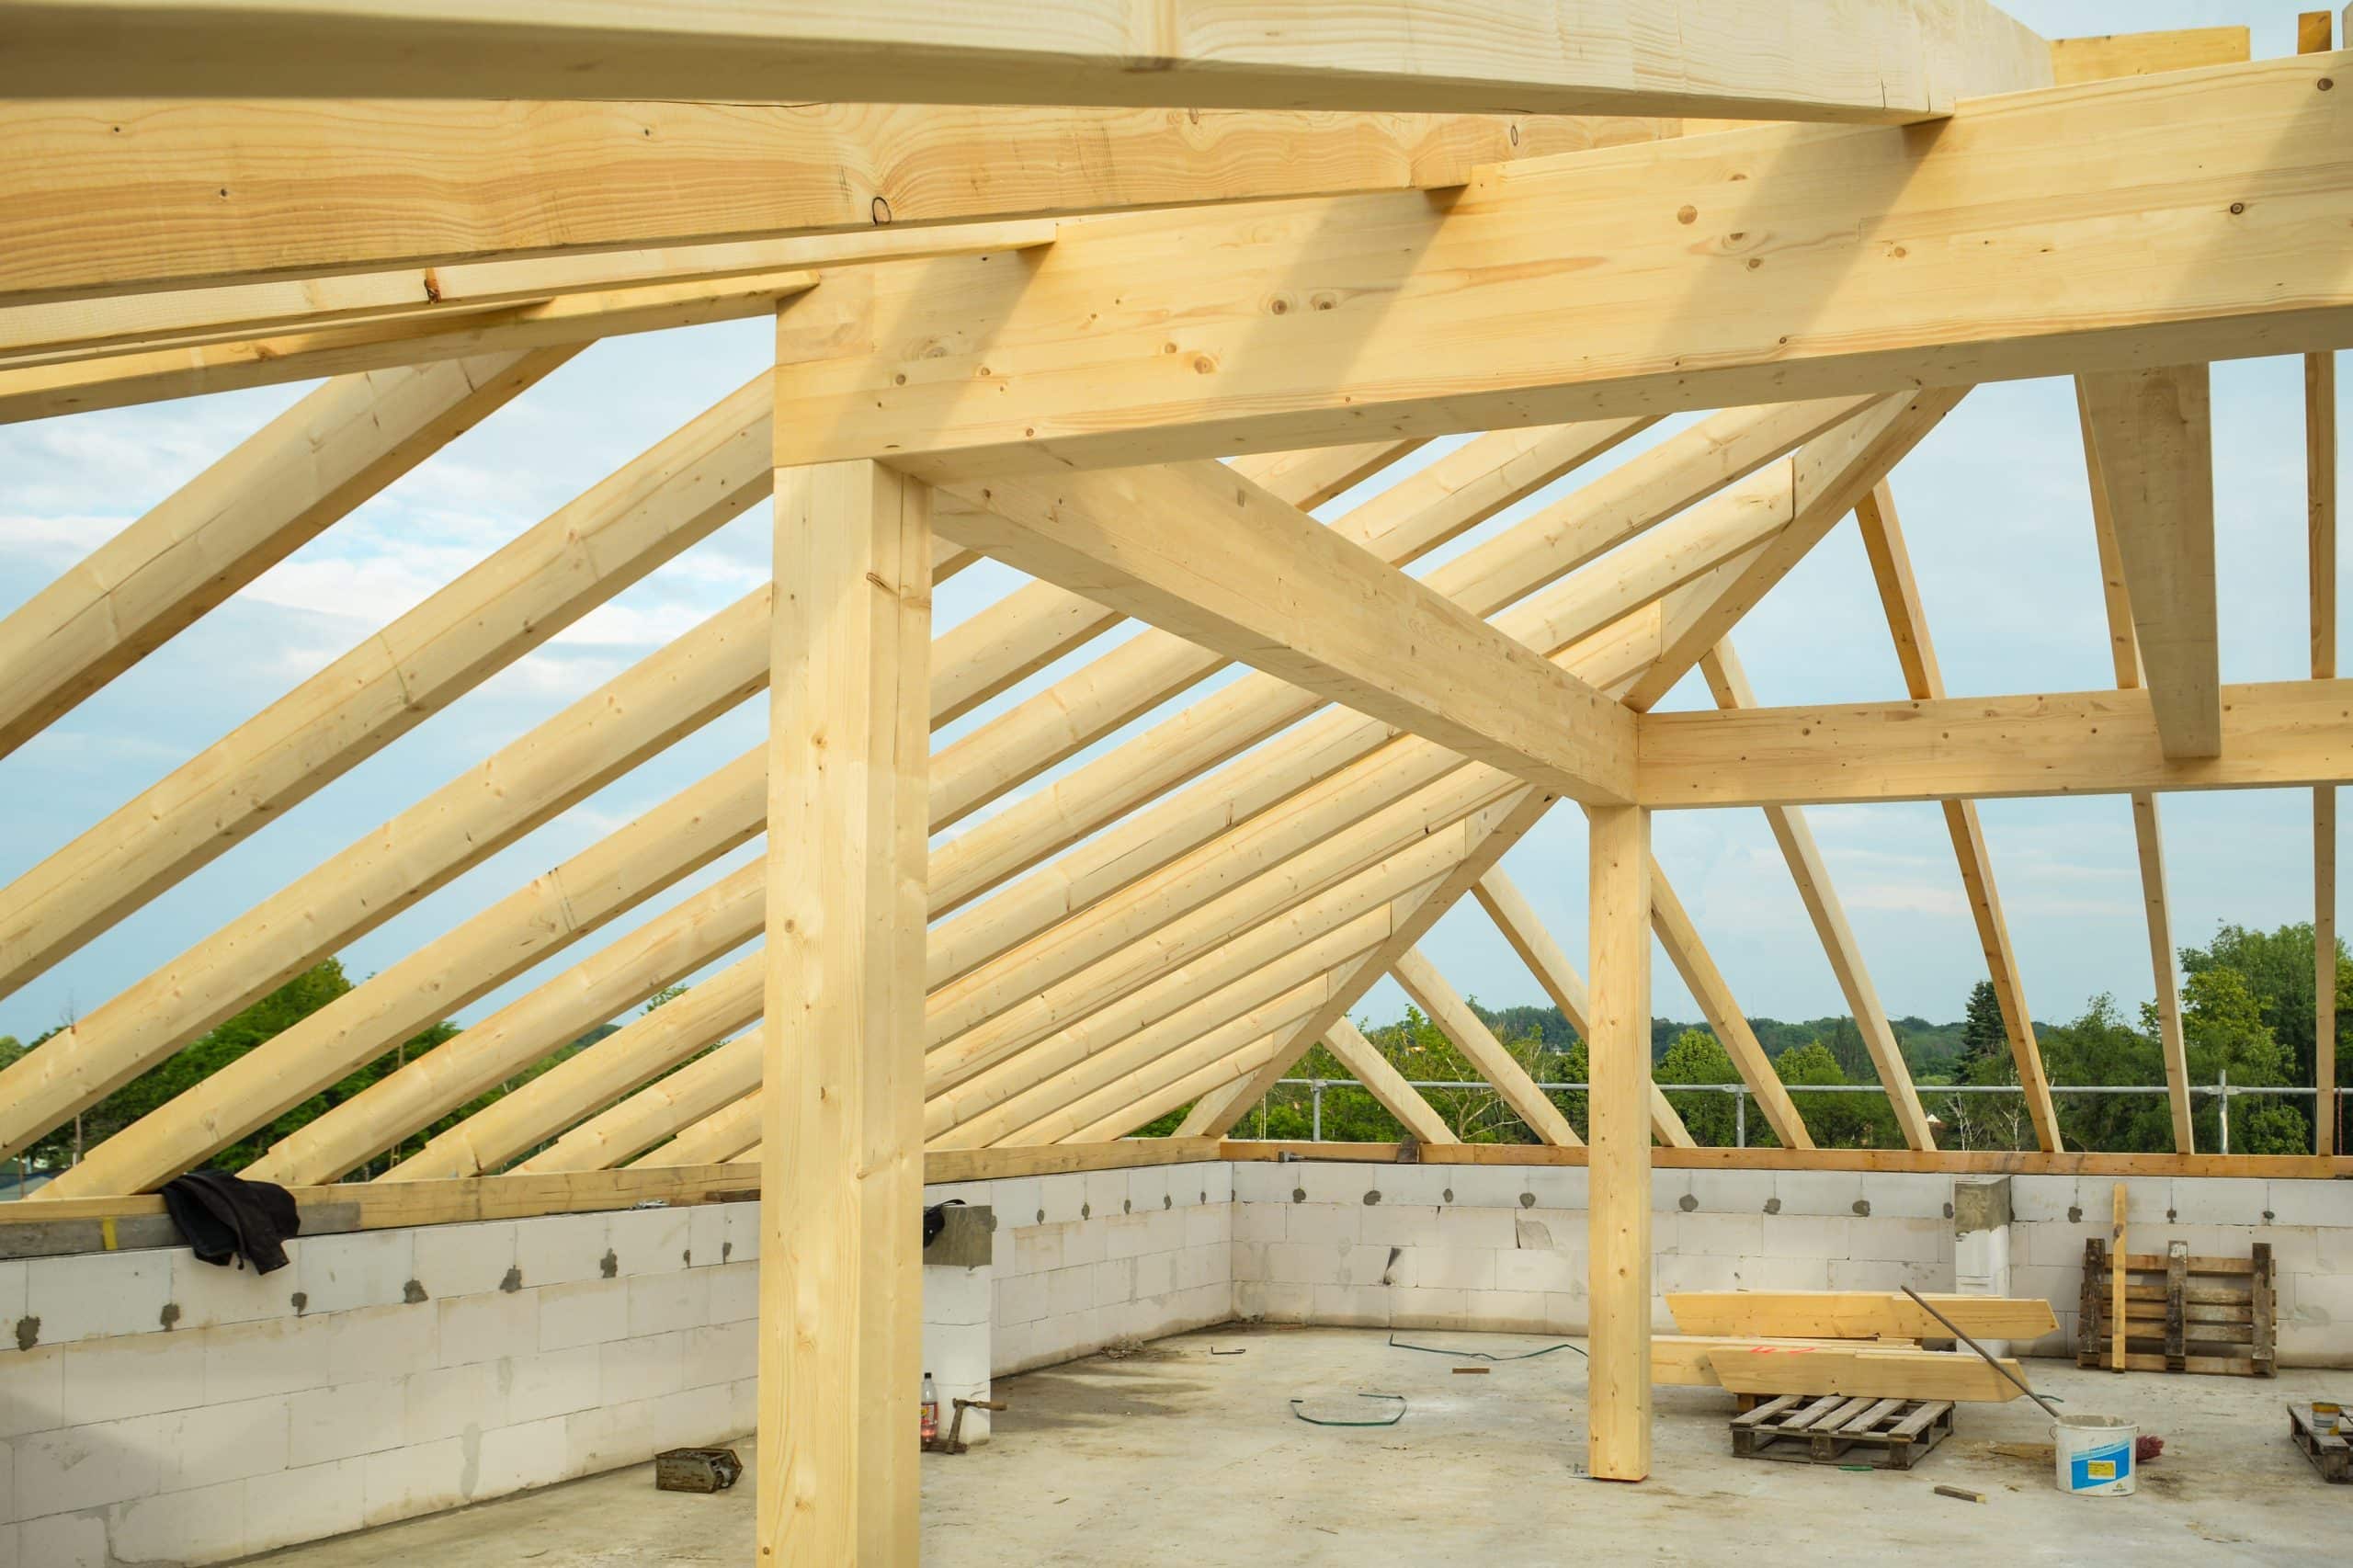 Trusses vs. Rafters: What's Best for Your Garage?